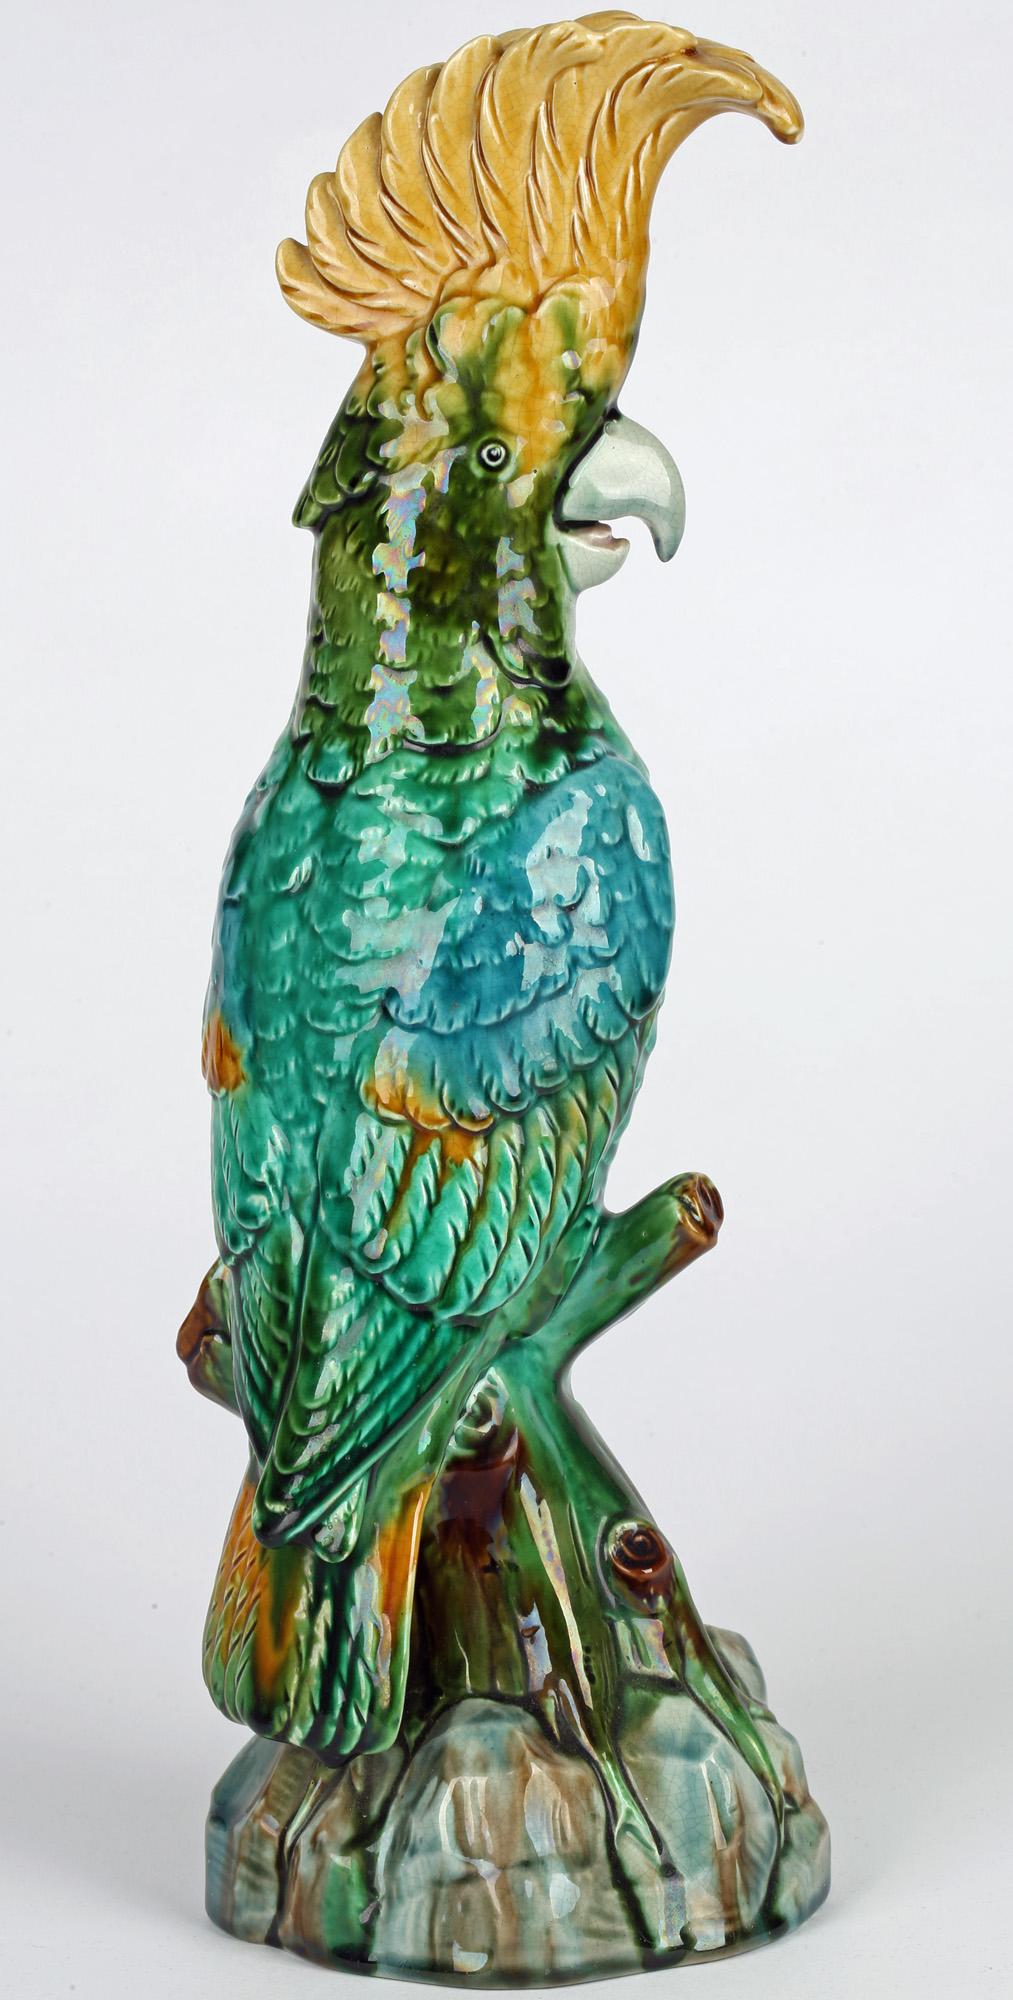 A rare and unusual Continental Majolica pottery figure of a cockatoo on a perch dating from around 1880. The figure is lightly potted and very well detailed with the figure perched on a rockwork and tree stump base painted in naturalistic coloured